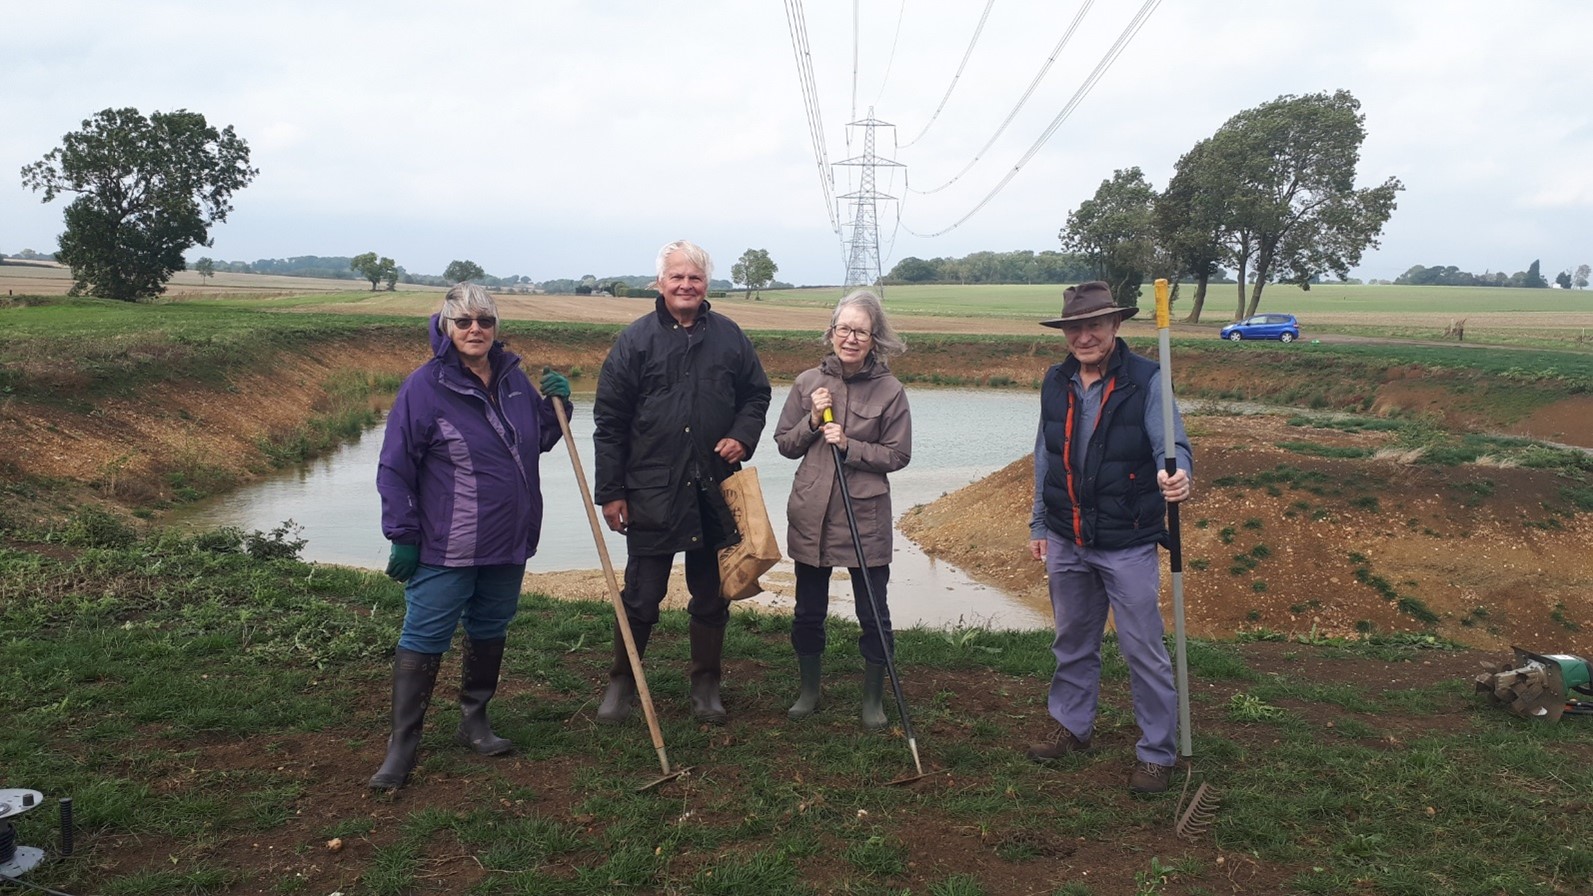 4 people standing with gardening tools in front of a pond